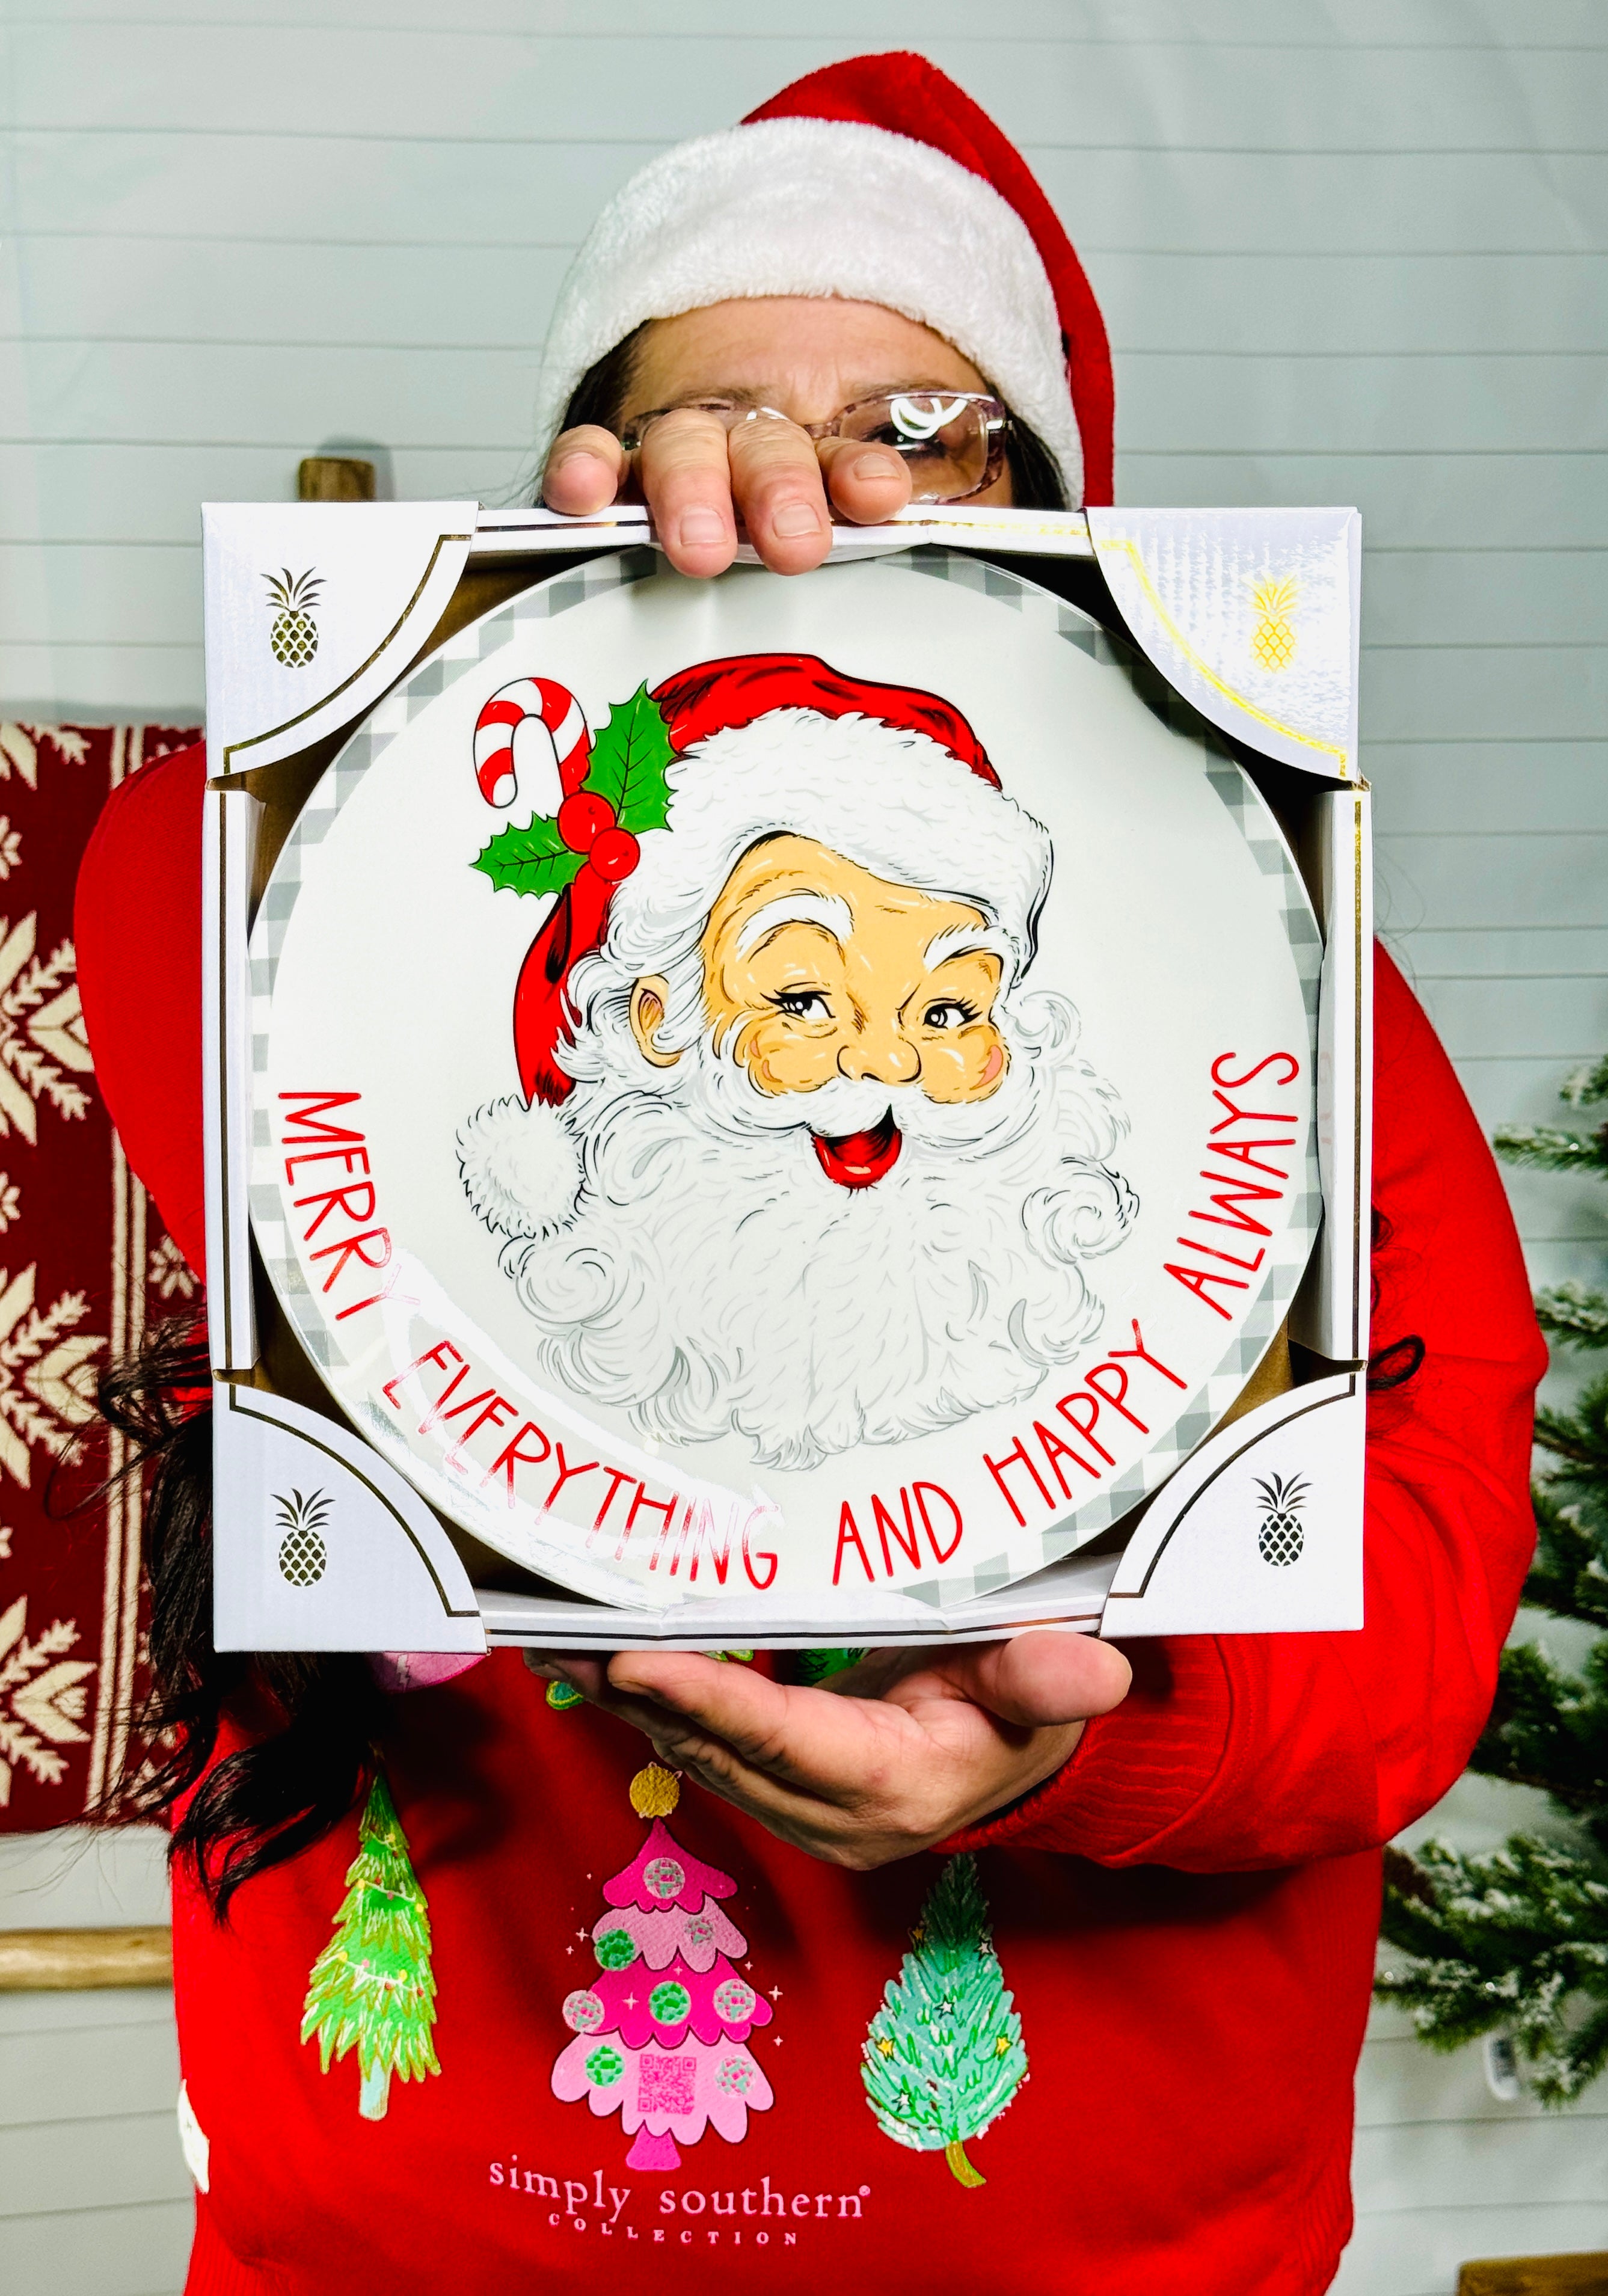 SIMPLY SOUTHERN FESTIVE HOLIDAY PLATES